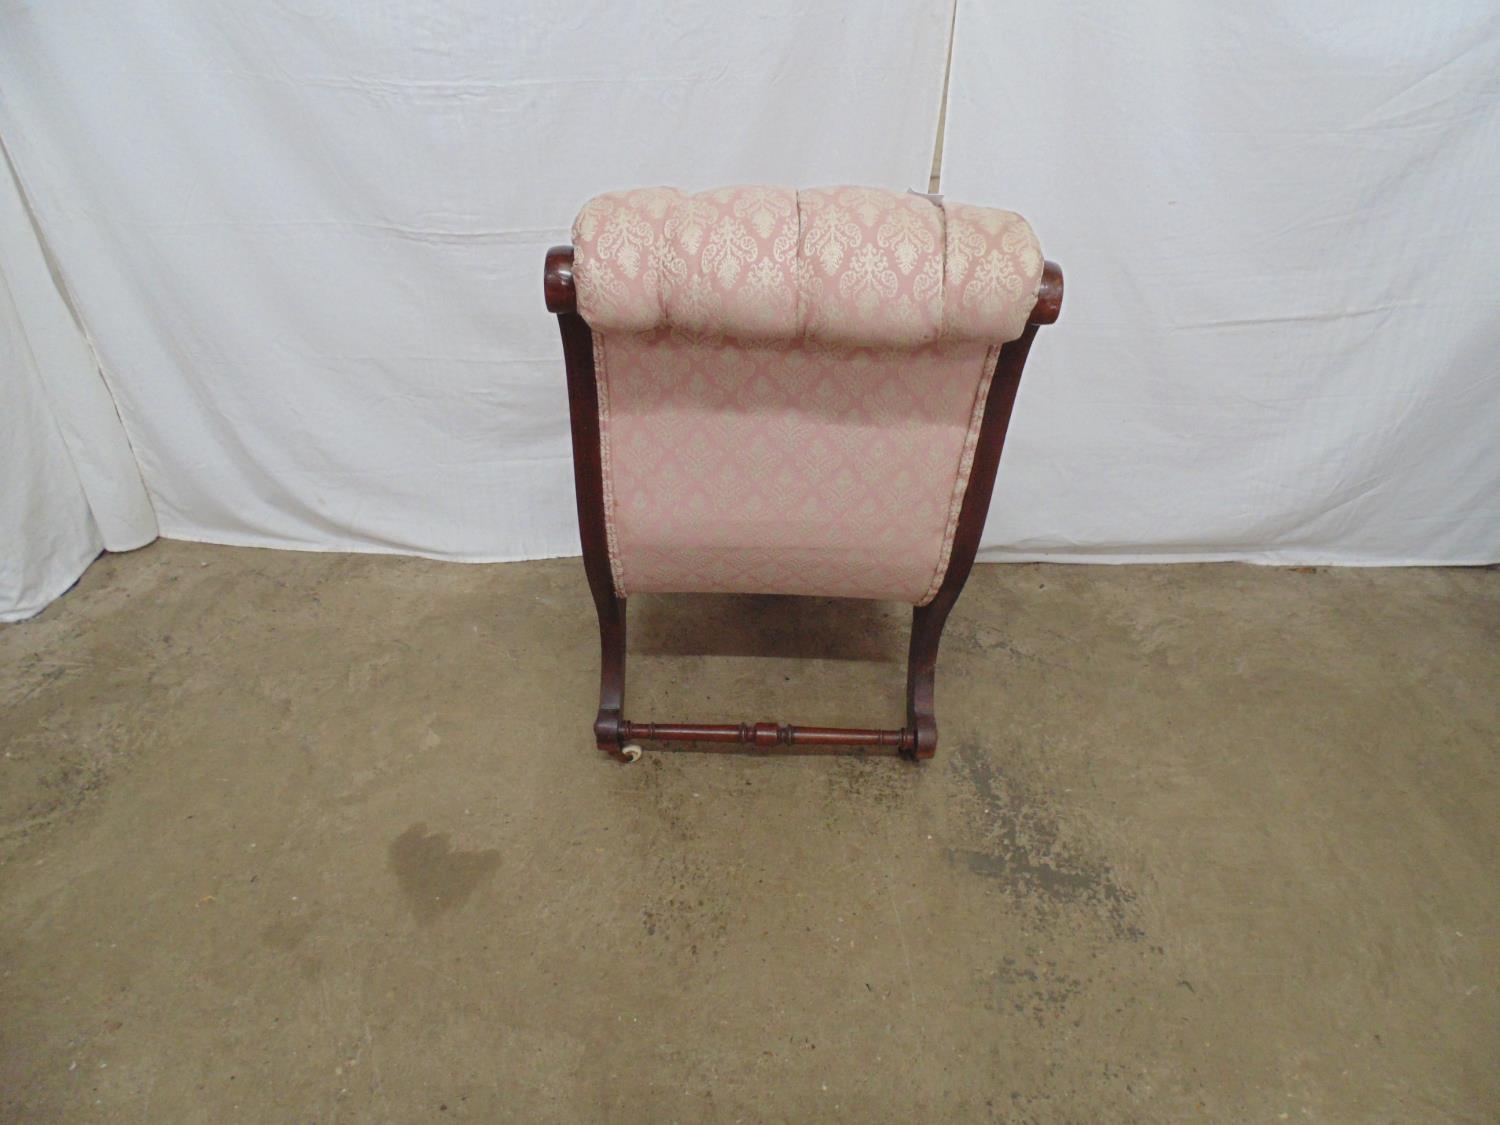 Mahogany slipper chair having buttoned pink and white upholstery, standing on scrolled legs ending - Image 3 of 4